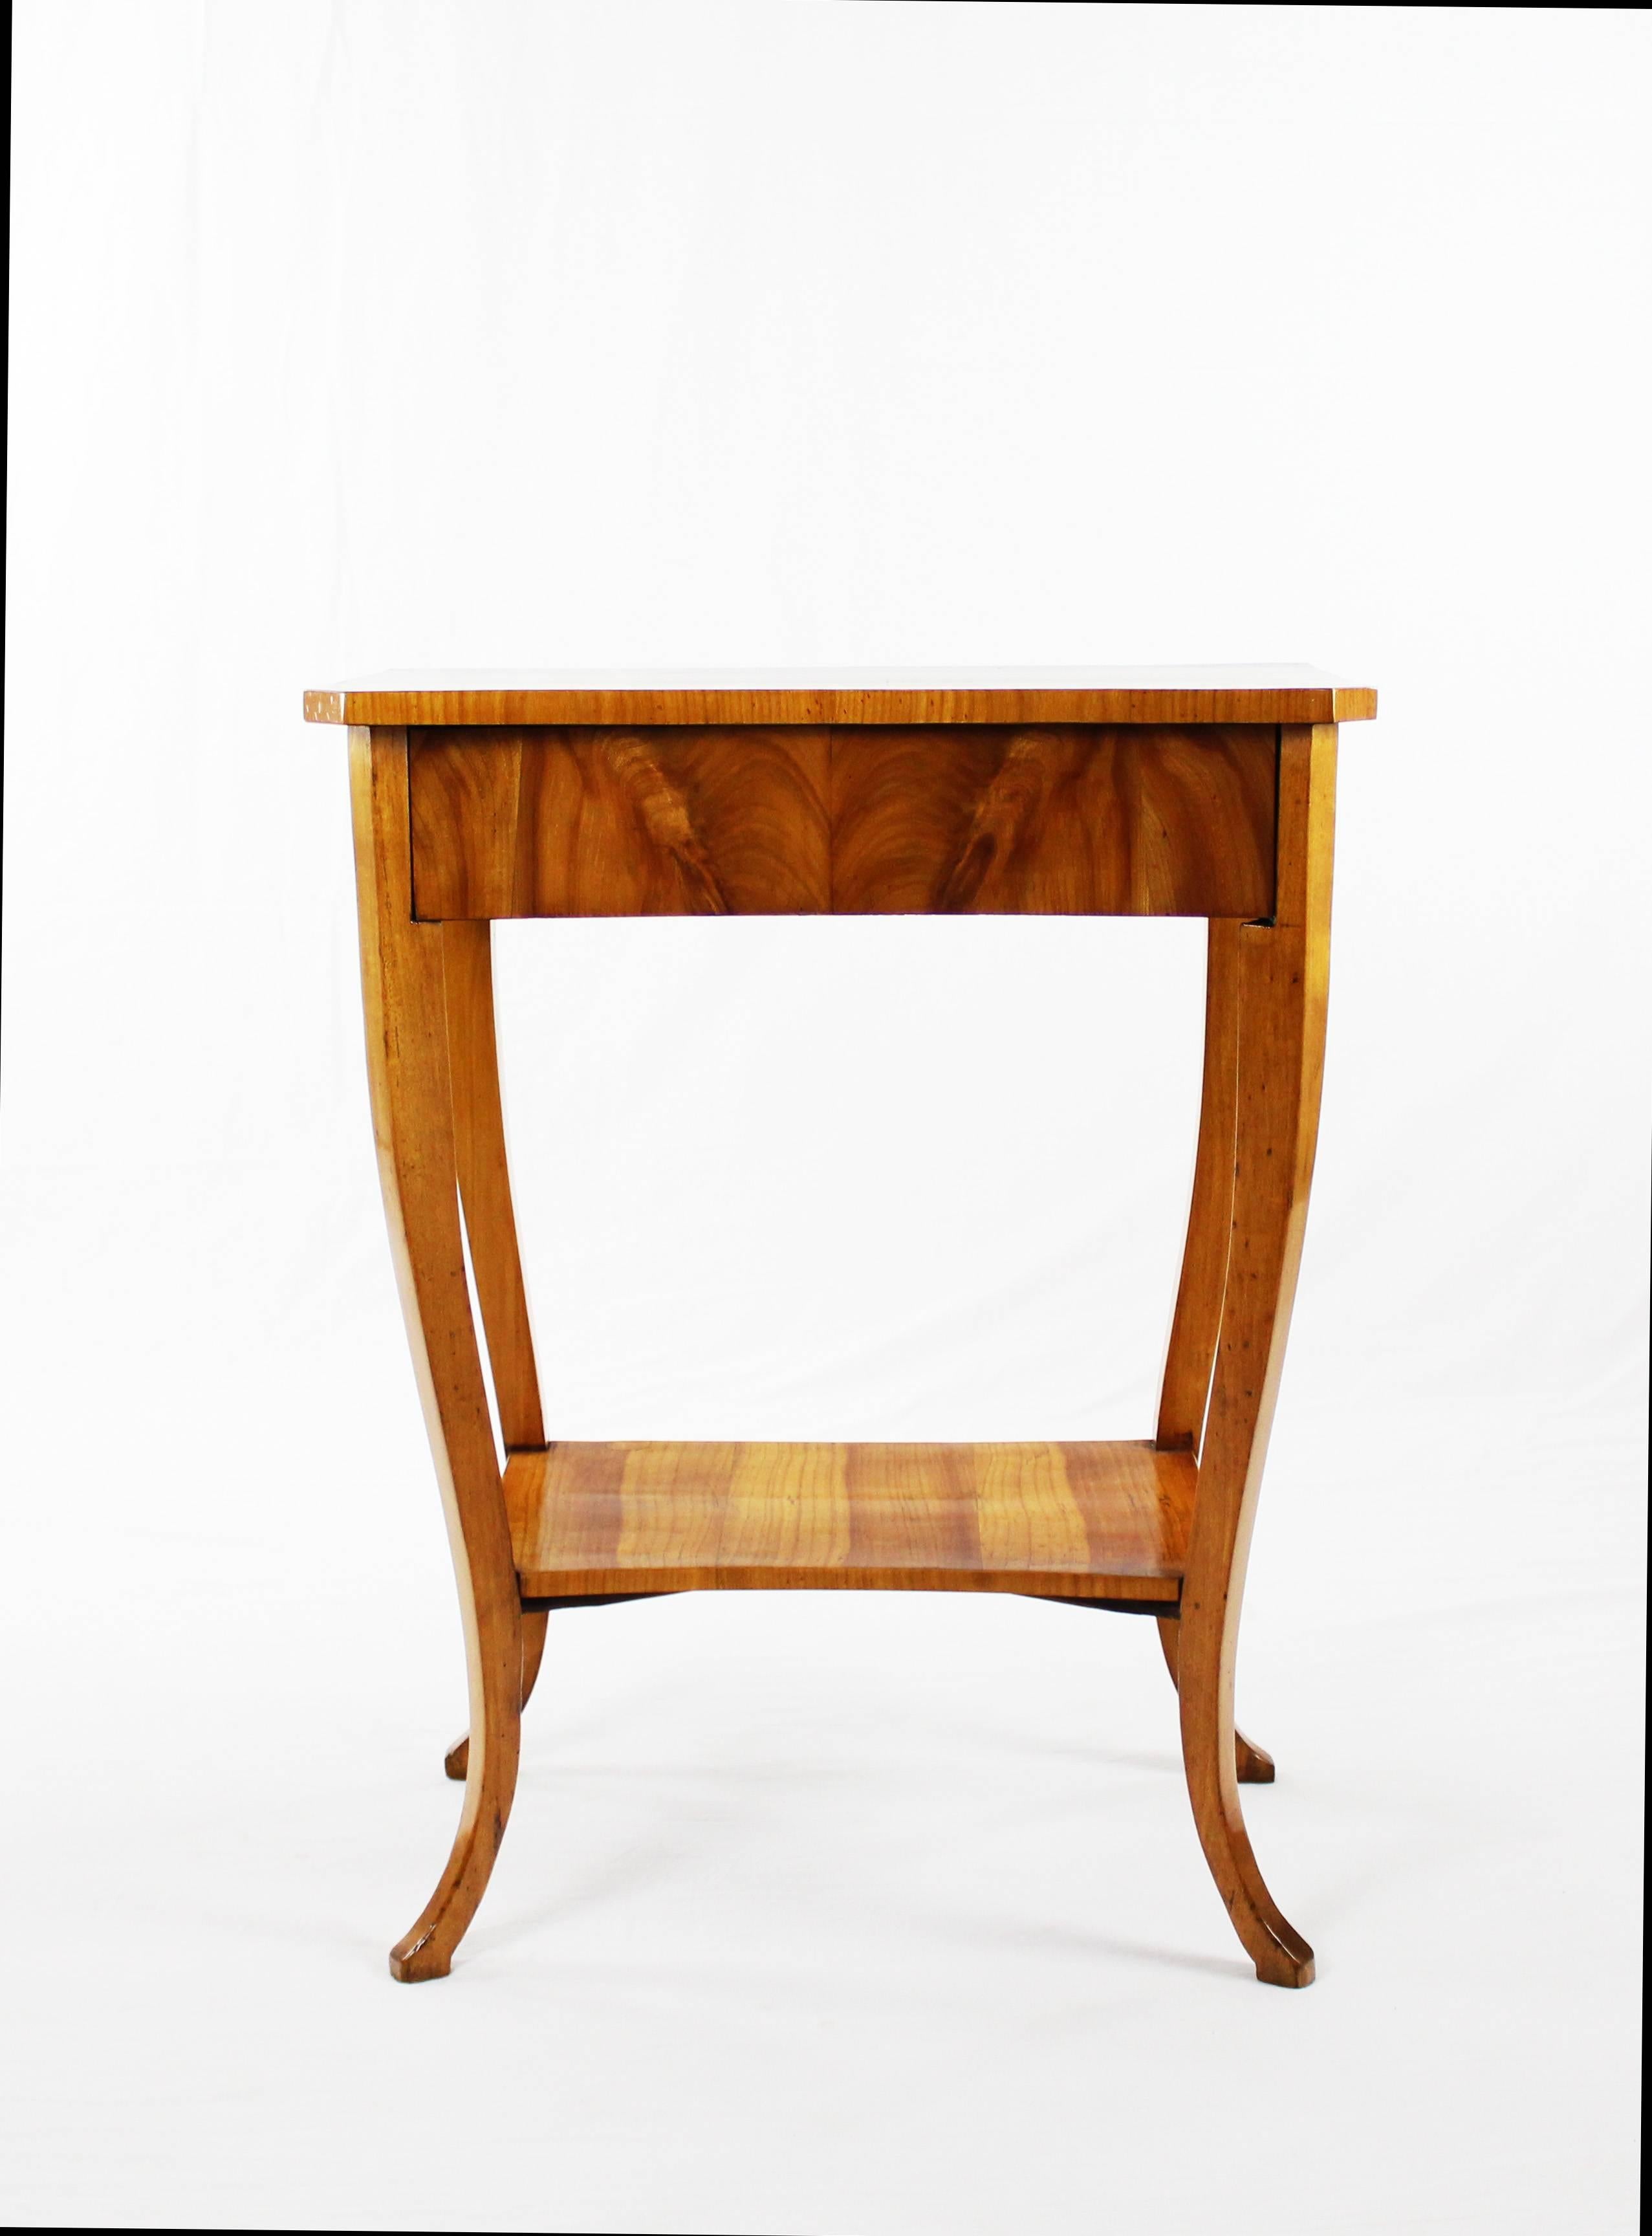 Console table, circa 1820-1825.
Cherry tree veneered.
Nicely reflected veneer.
Concealed push.
Curved saber legs.
Restored residential-ready state.
Shellac hand polish.
Measures: Height 77.5 cm, width 62 cm, depth 39.5 cm.

I dispatch by